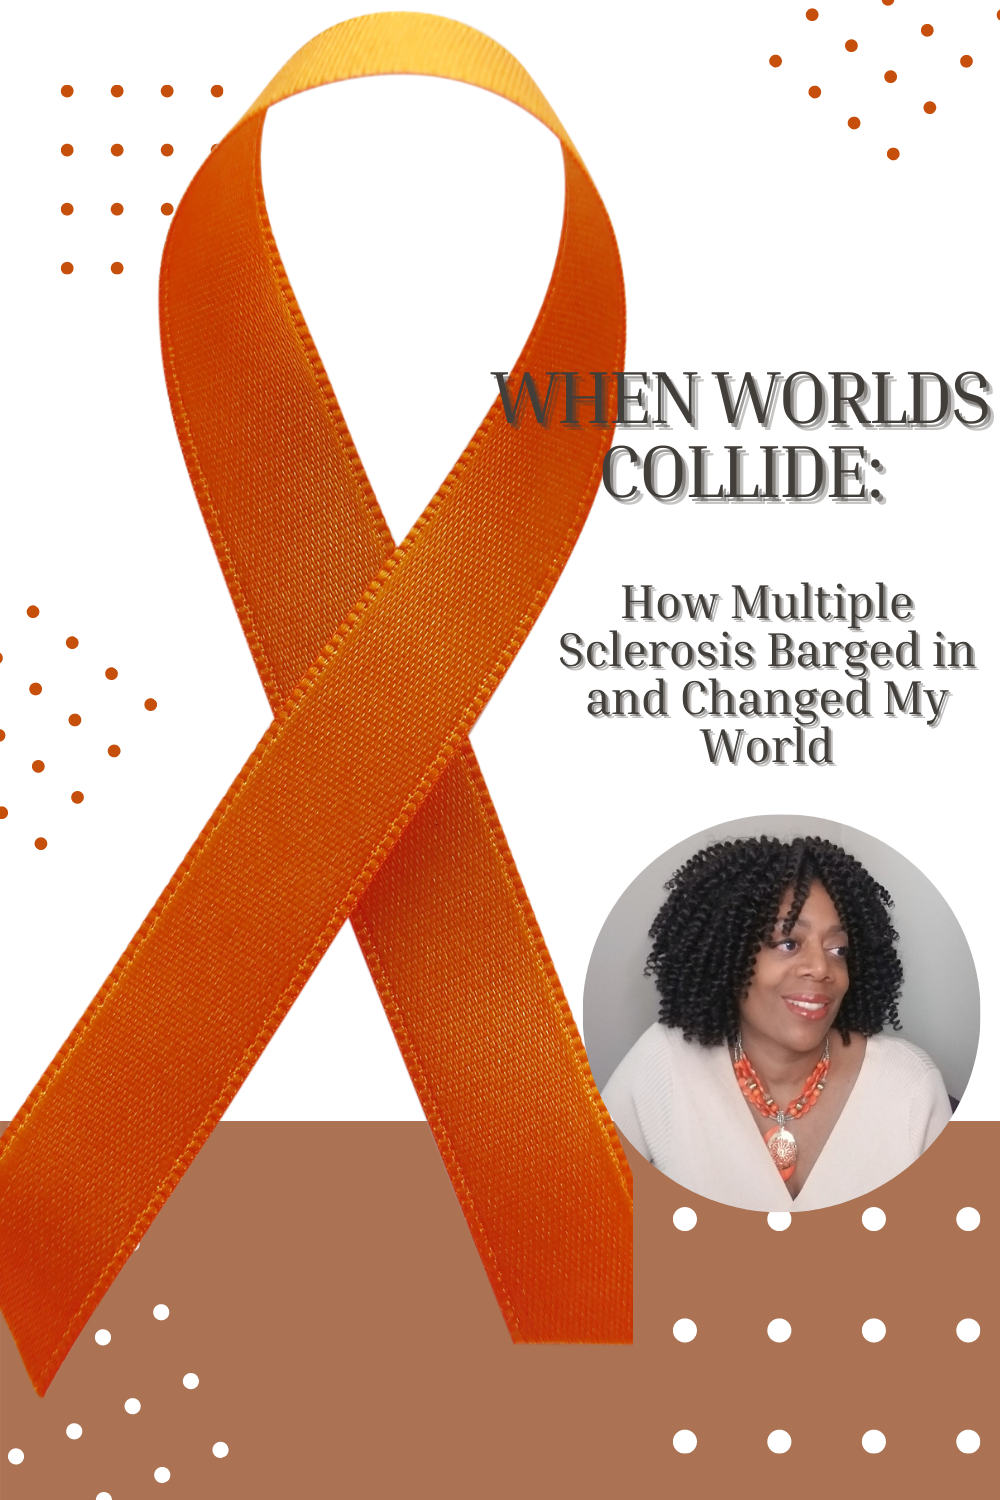 When Worlds Collide: How Multiple Sclerosis Barged in and Changed My World